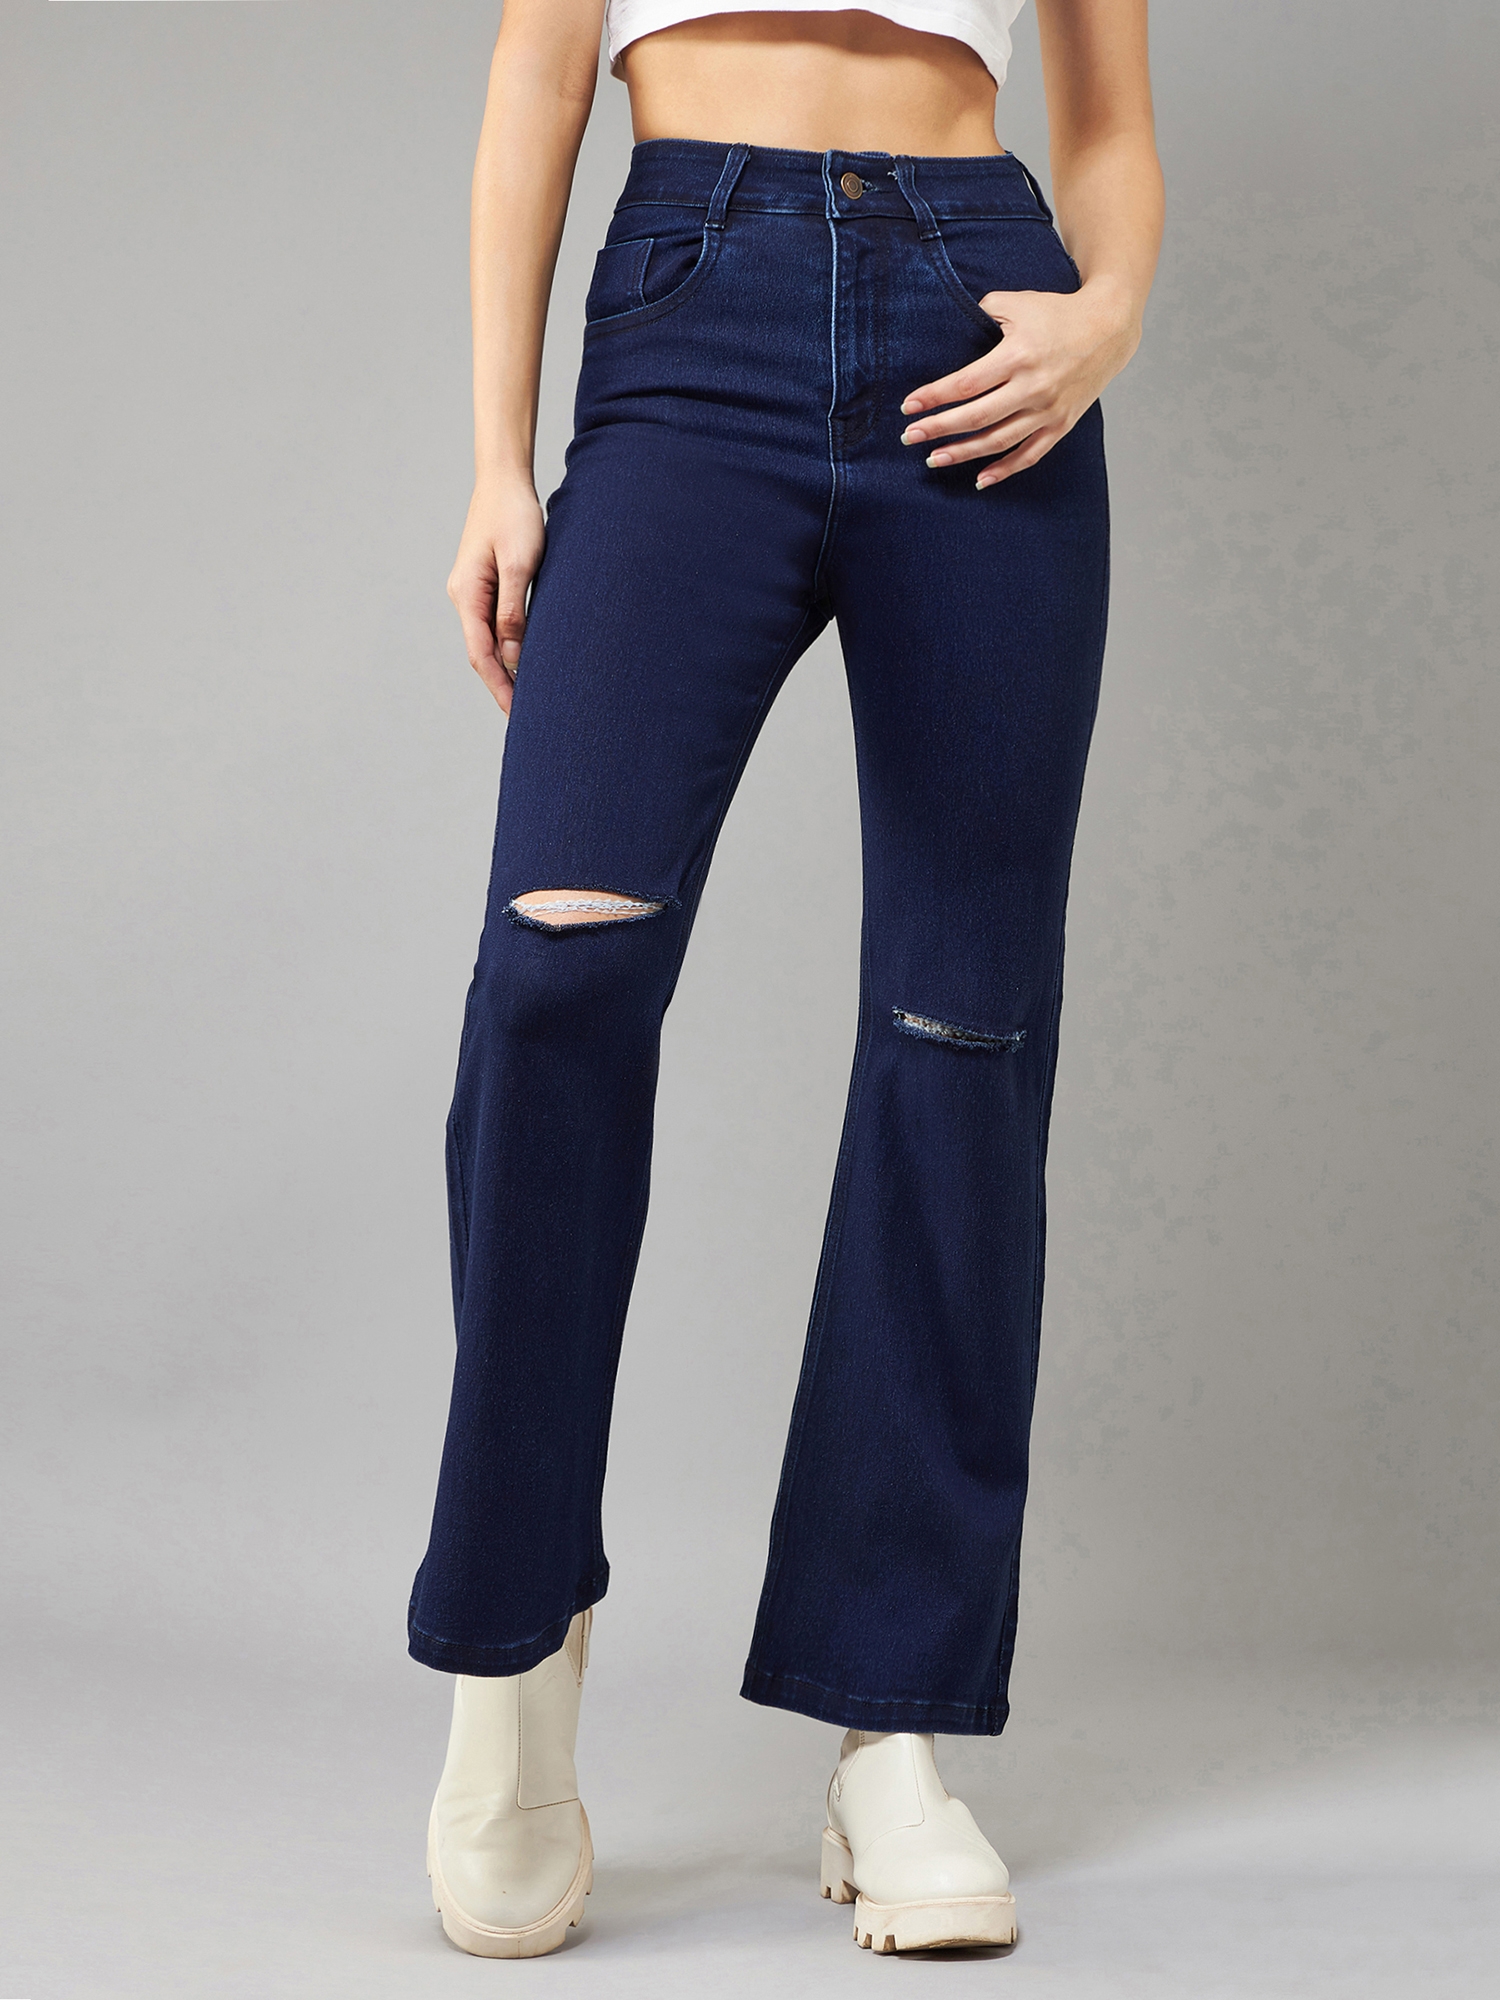 Dolce Crudo | Women's Navy Blue Bootcut High Rise Clean Look Regular Stretchable Denim Jeans